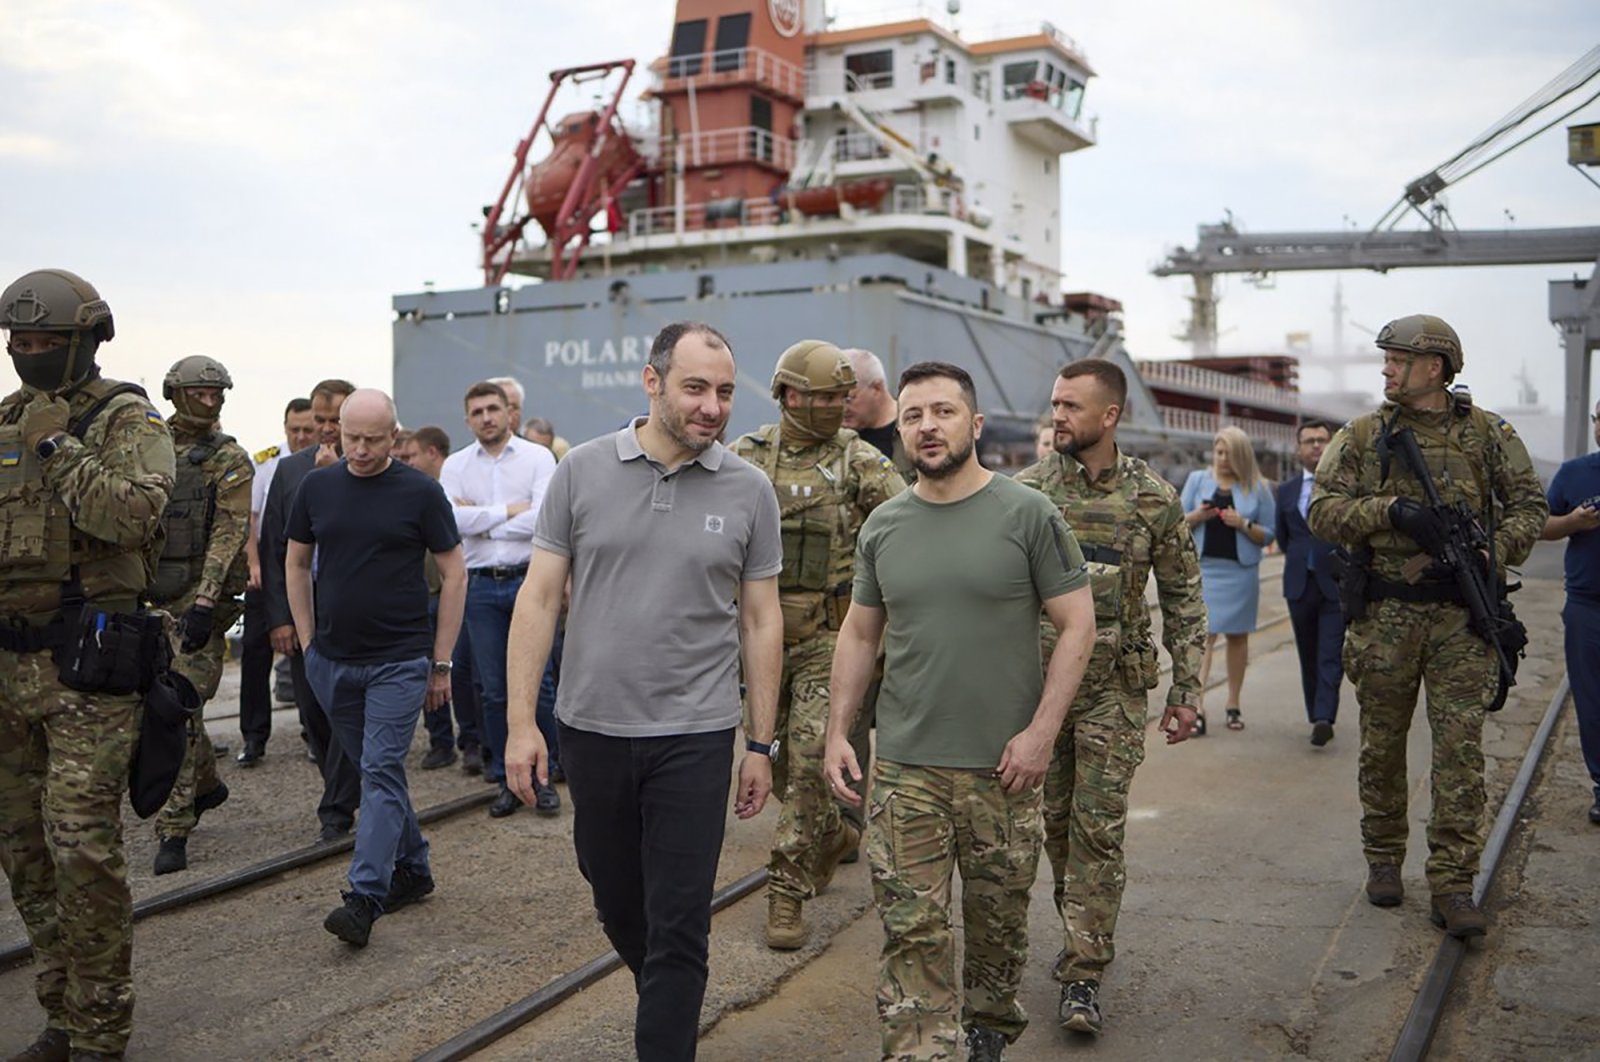 Ukrainian President Volodymyr Zelenskyy (C) surrounded by ambassadors of different countries and U.N. officials, visits a port in Chernomork during the loading of grain on a Turkish ship, background, close to Odessa, Ukraine, July 29, 2022. (Ukrainian Presidential Press Office via AP)